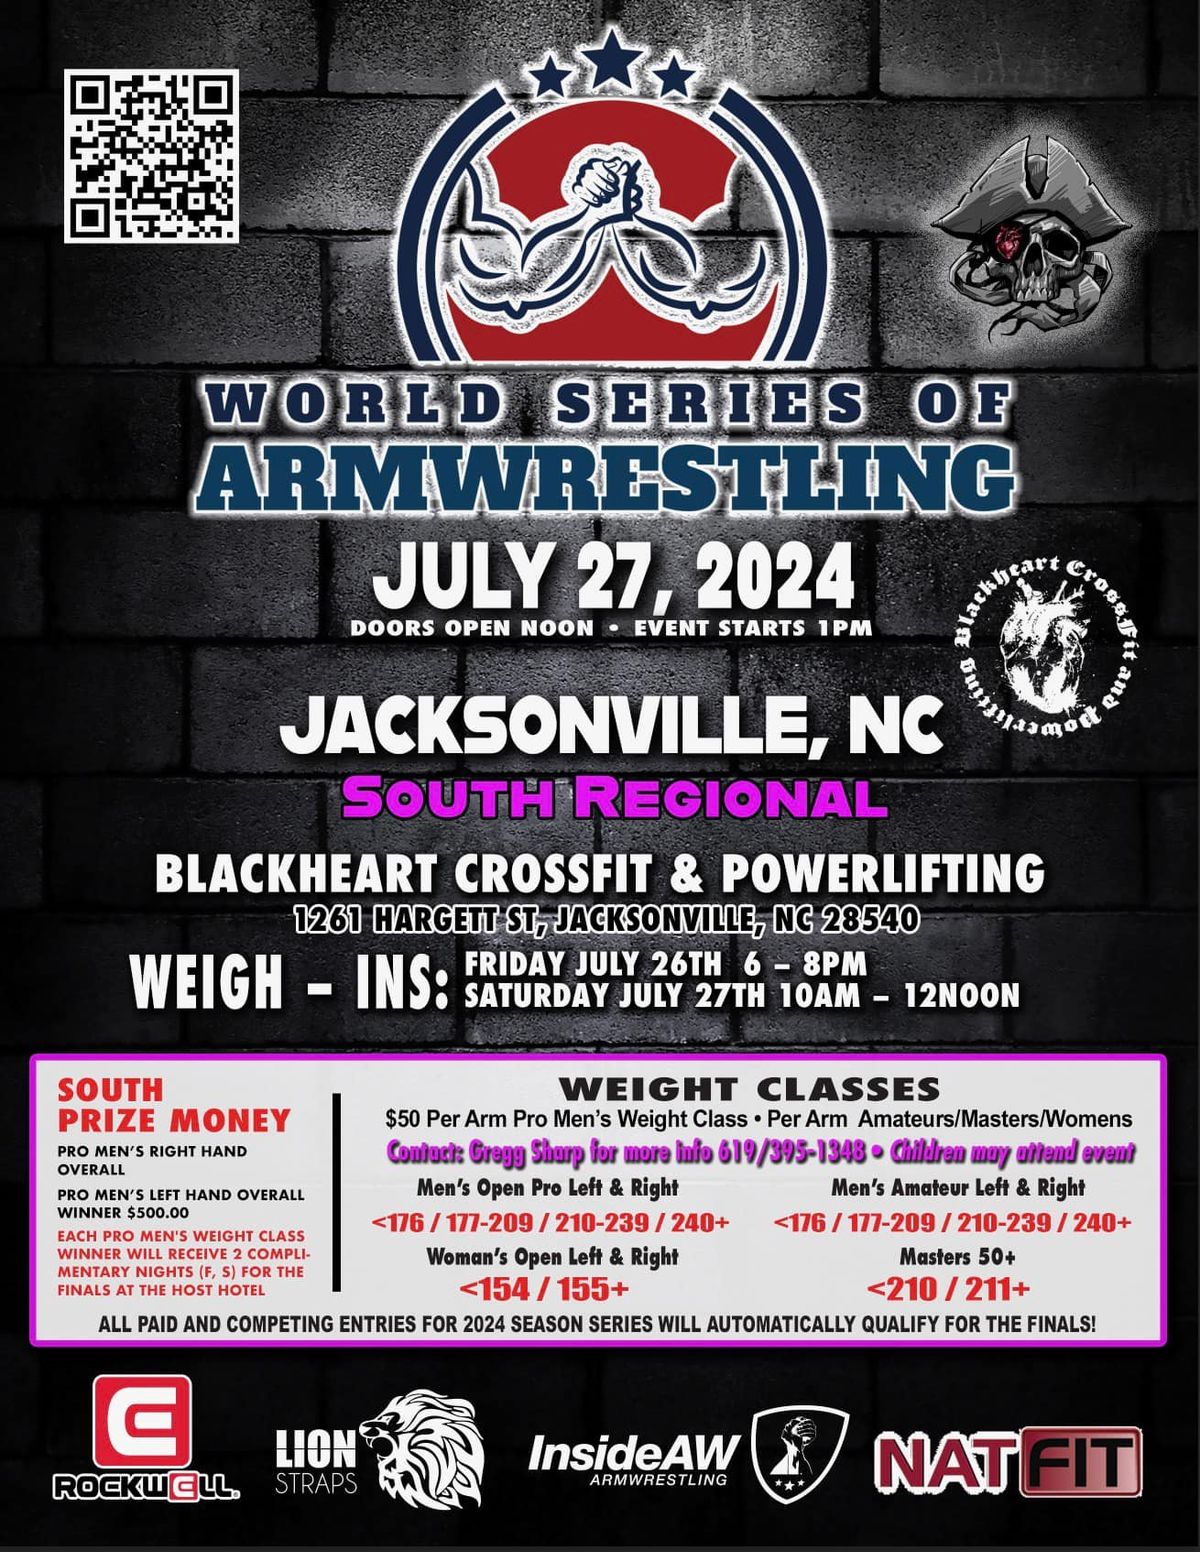 World Series of Armwrestling - South II Regional Jacksonville, NC